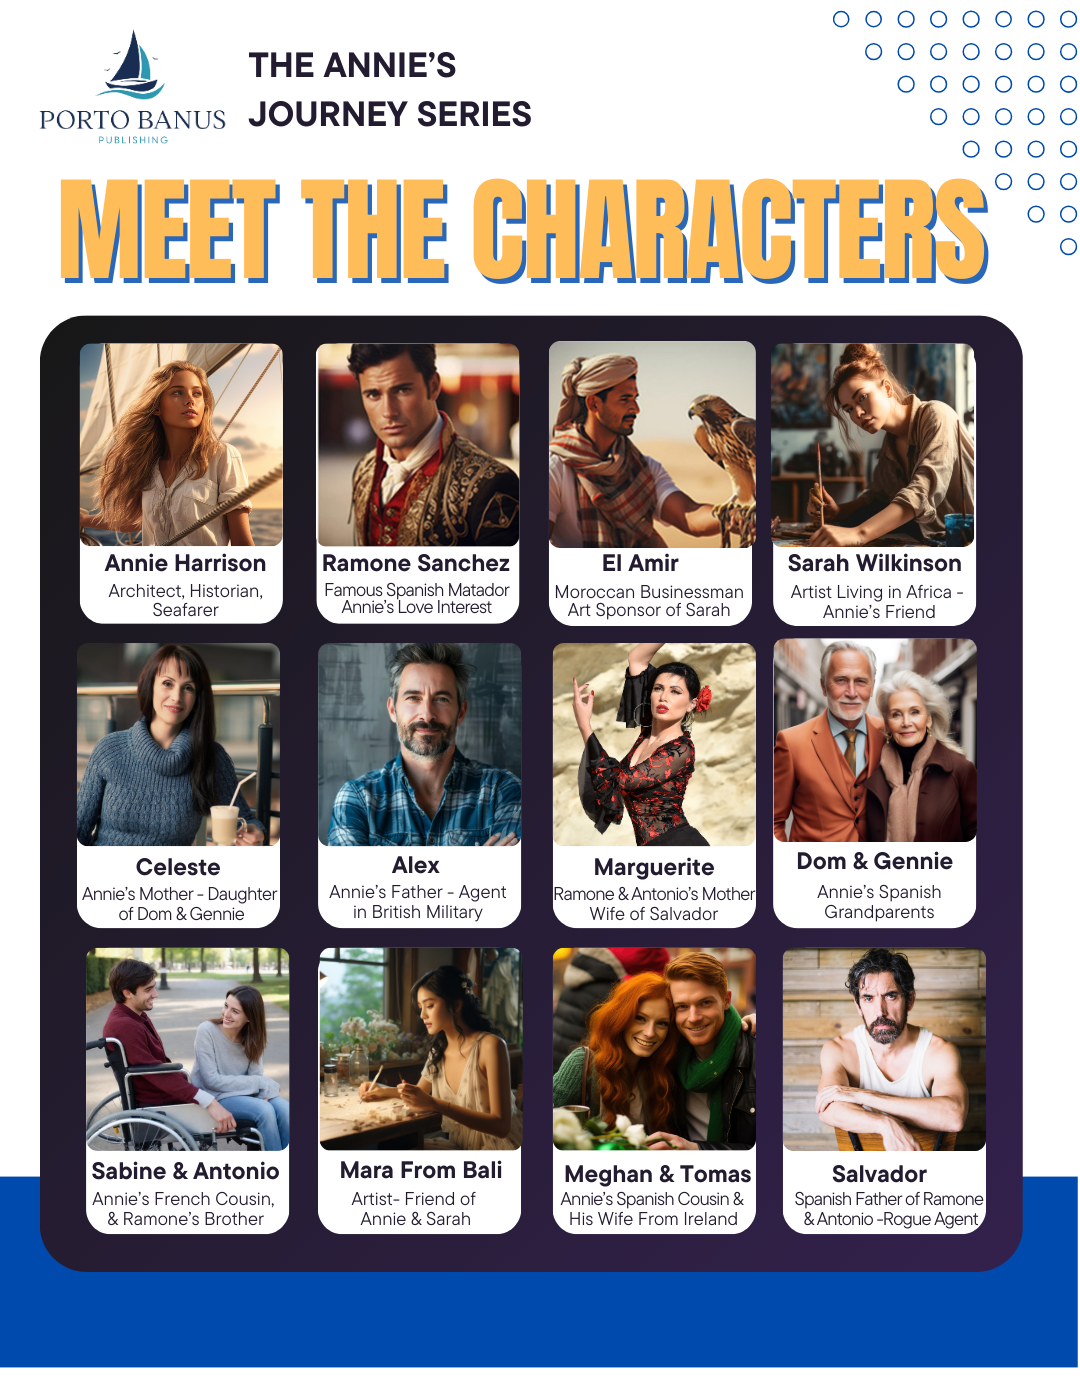 Cast of characters in Annie's Journey series